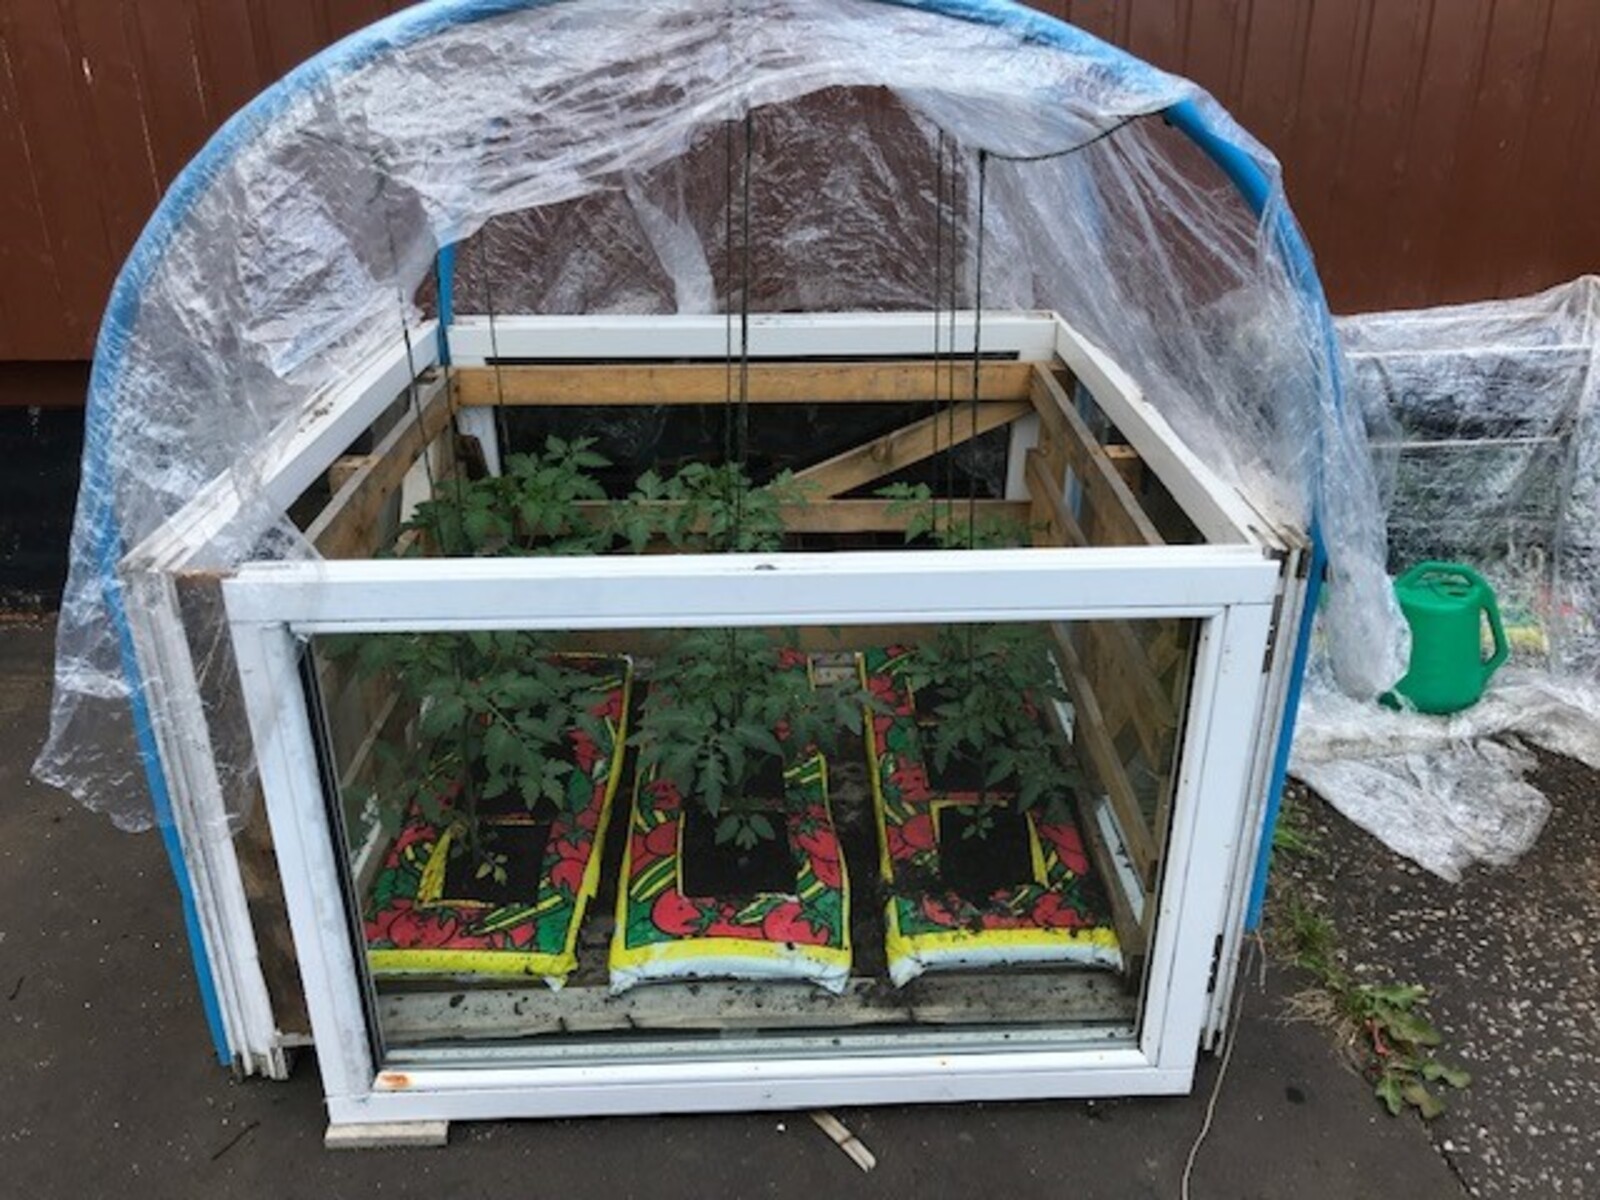 Recycled windows help the tomatoes get off to a good start